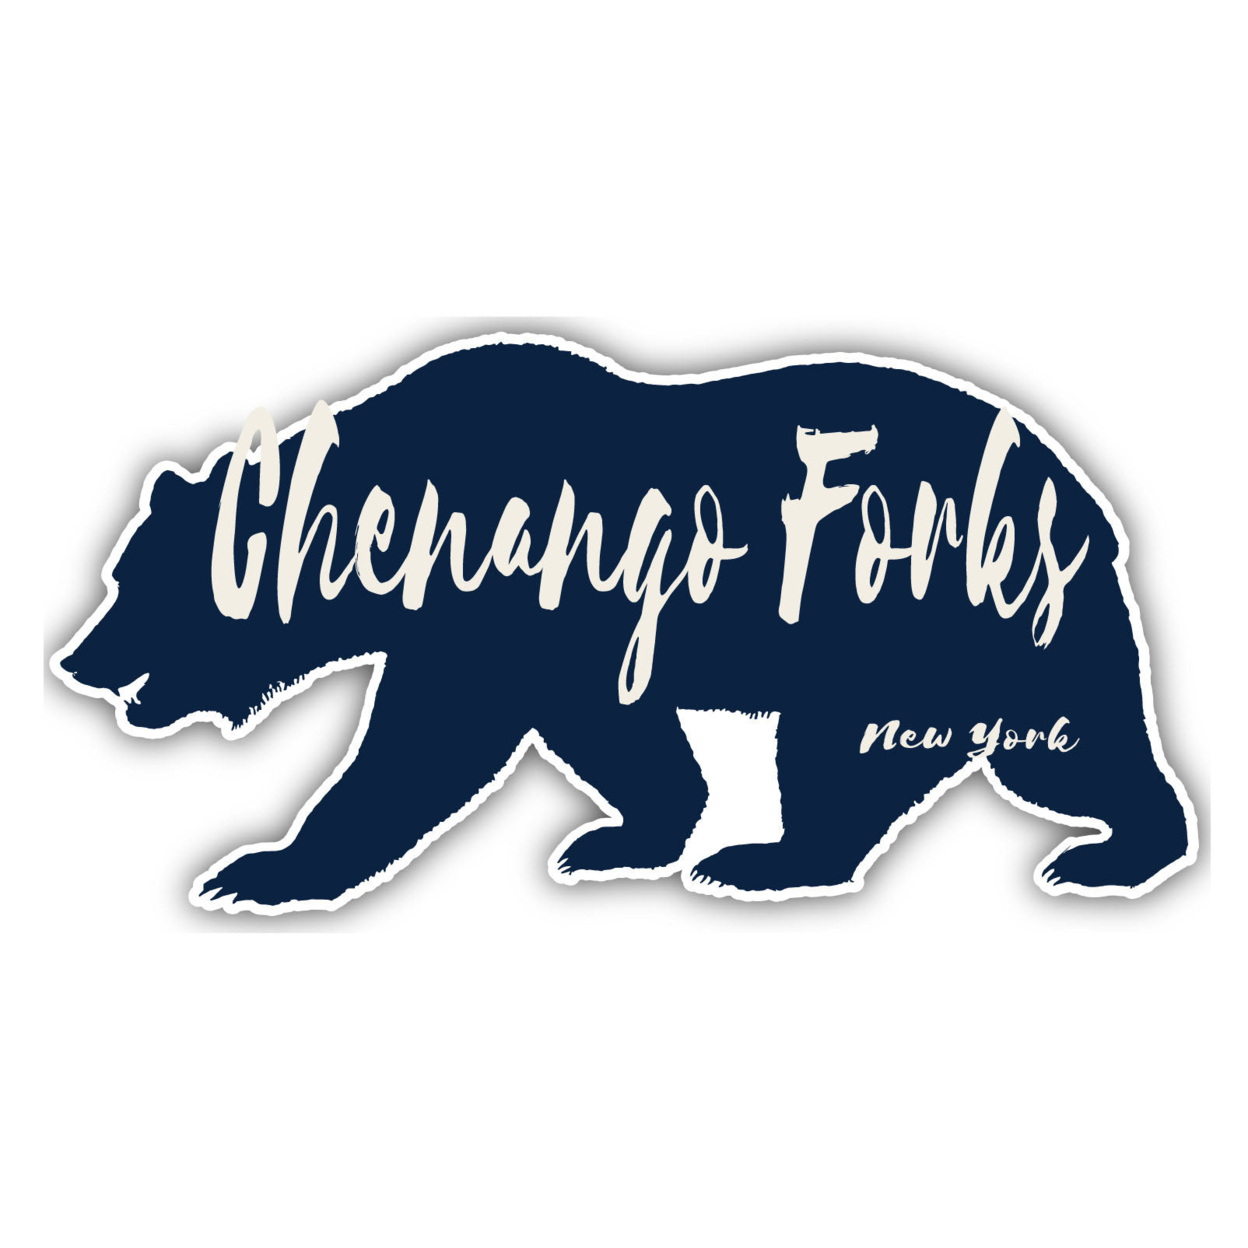 Chenango Forks New York Souvenir Decorative Stickers (Choose Theme And Size) - 4-Pack, 12-Inch, Bear